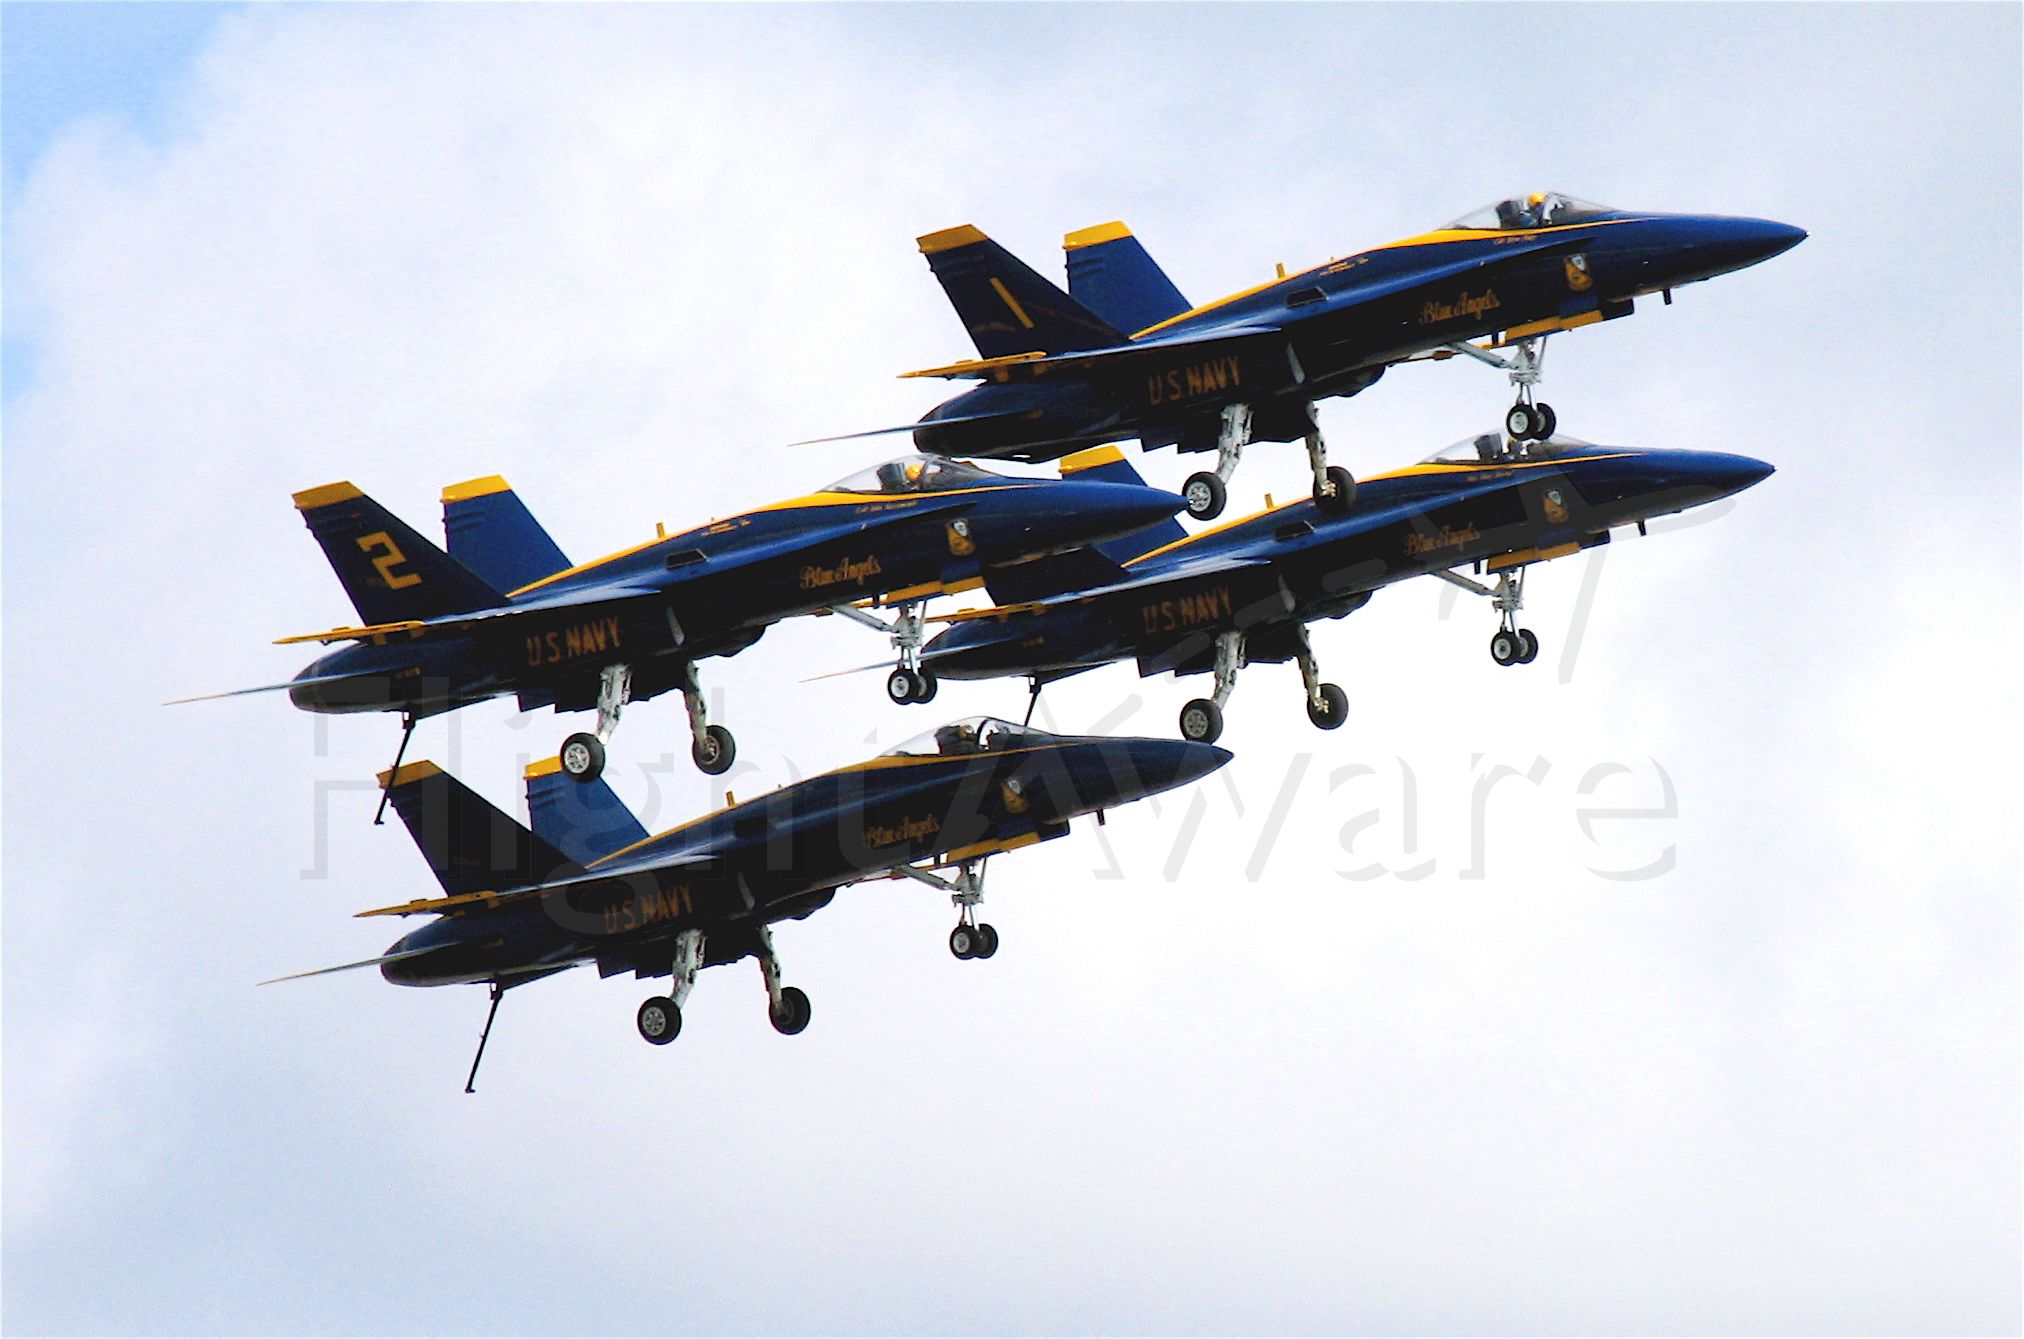 — — - Dirty formation fly-by during practice session at KNPA (Pensacola NAS).